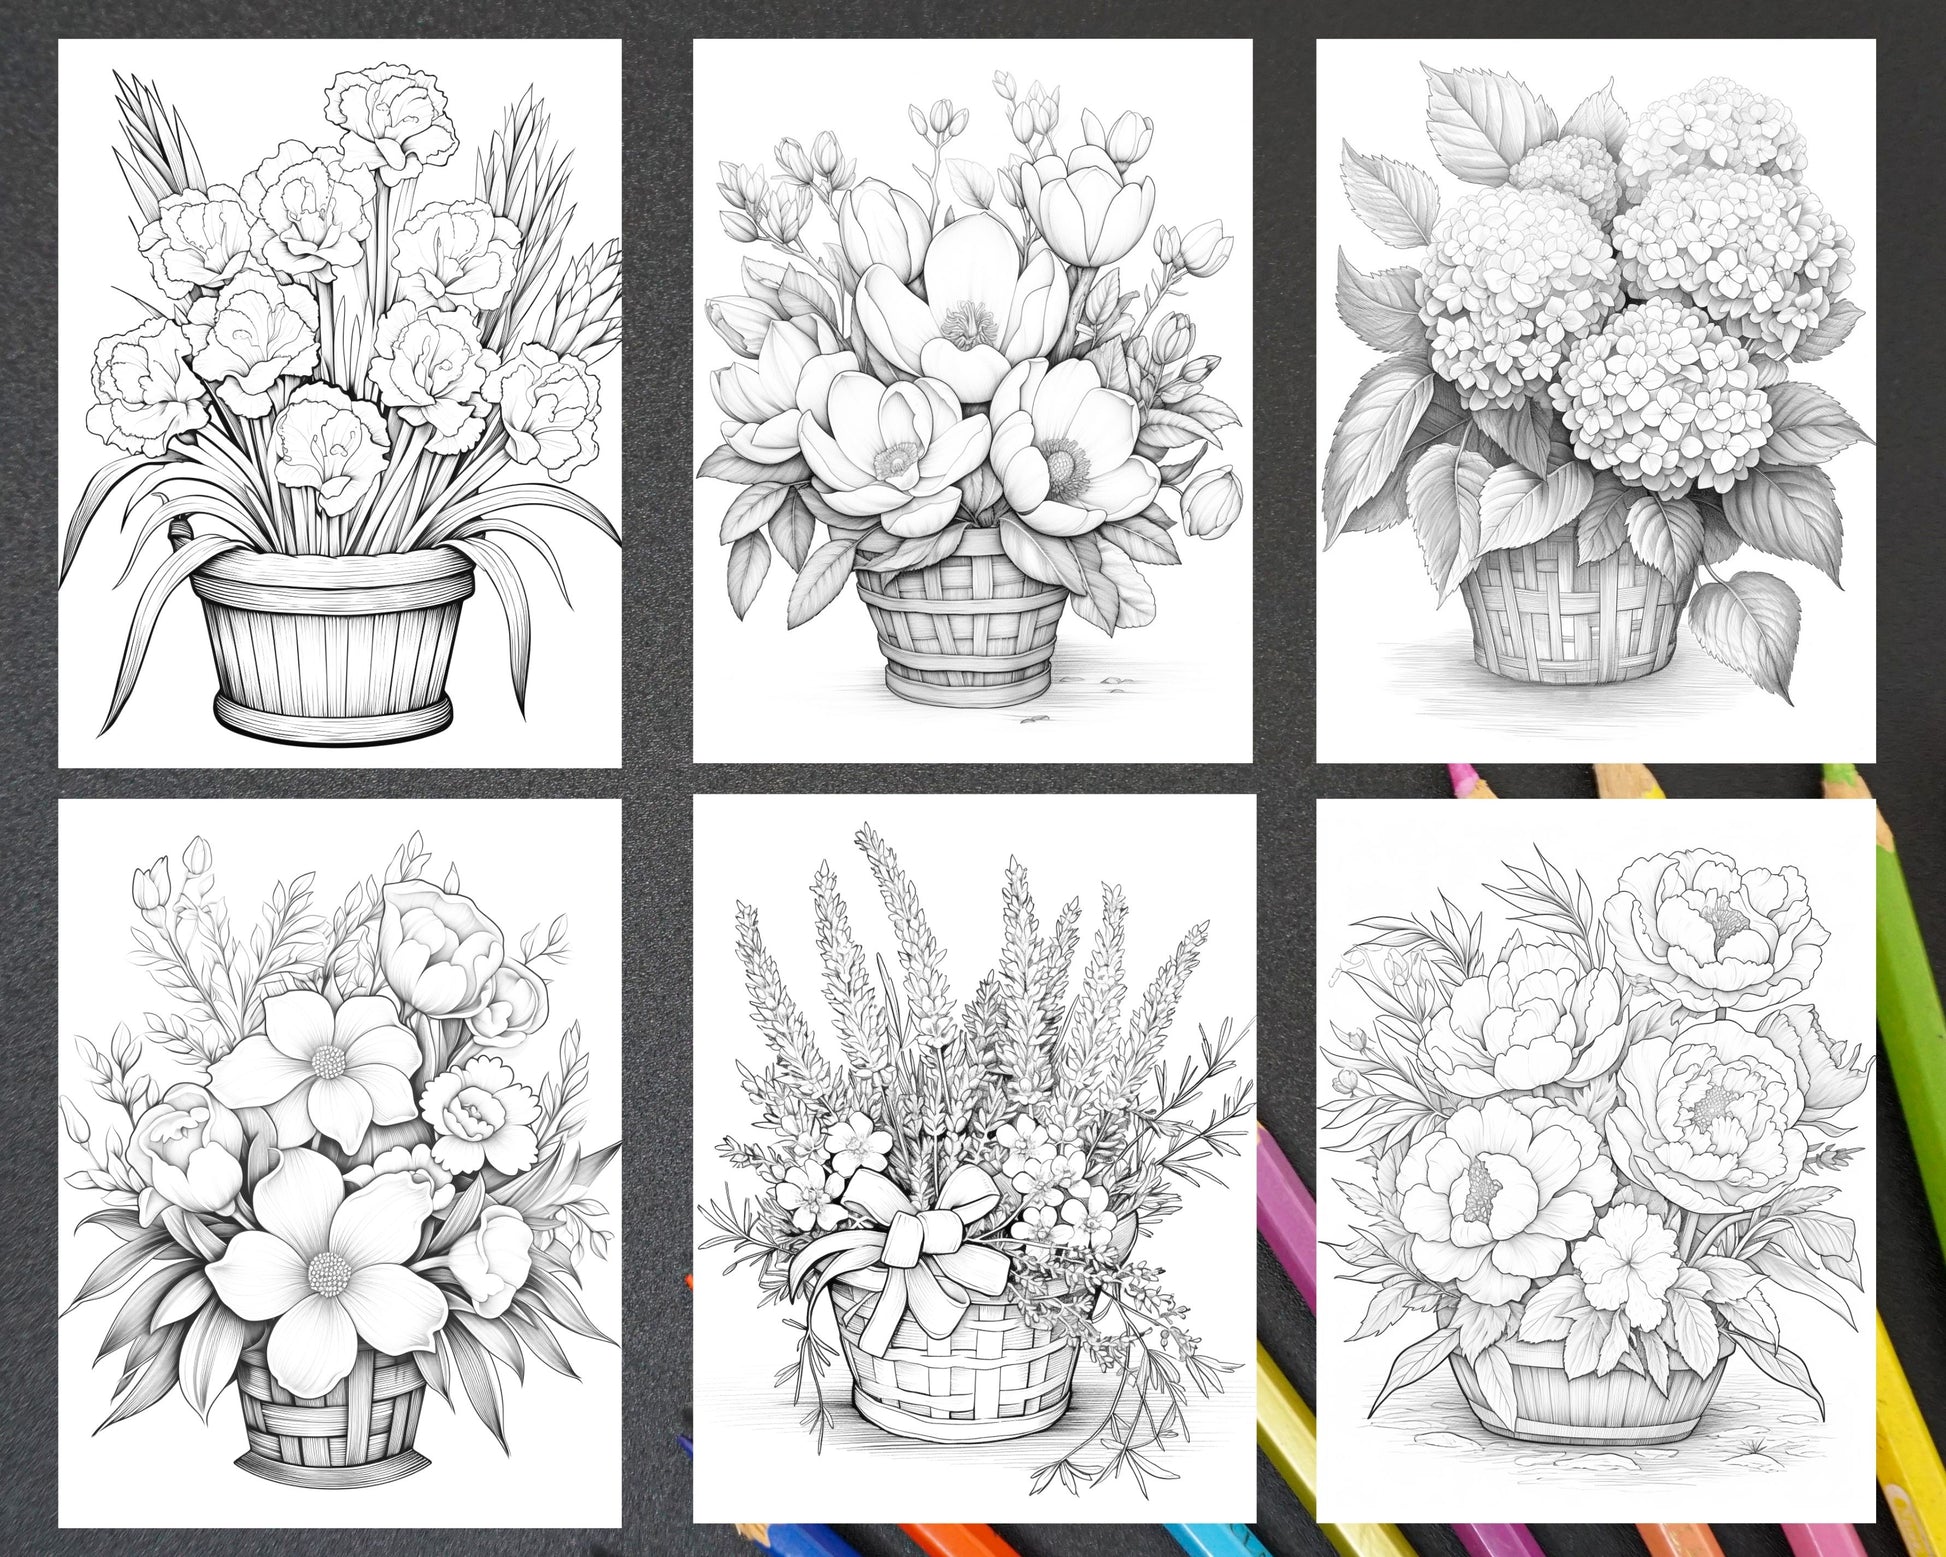 Flower baskets grayscale coloring pages, adult coloring, grayscale art, black and white coloring, printable coloring pages, stress relief, mindfulness, coloring therapy, grayscale illustrations